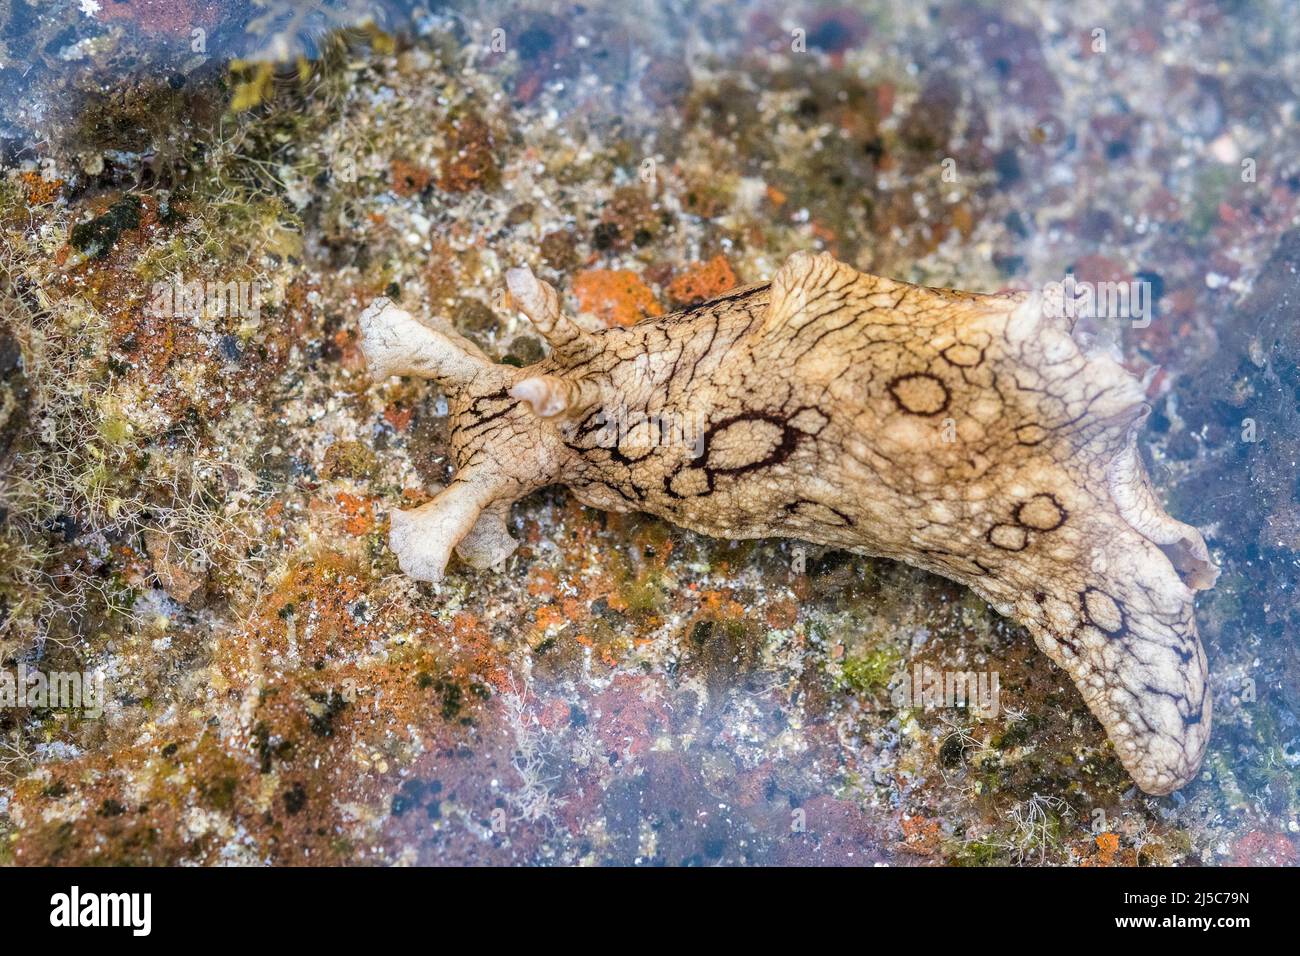 Aplysia dactylomela, the spotted sea hare, is a species of large sea slug, a marine opisthobranch gastropod in the family Aplysiidae. Stock Photo